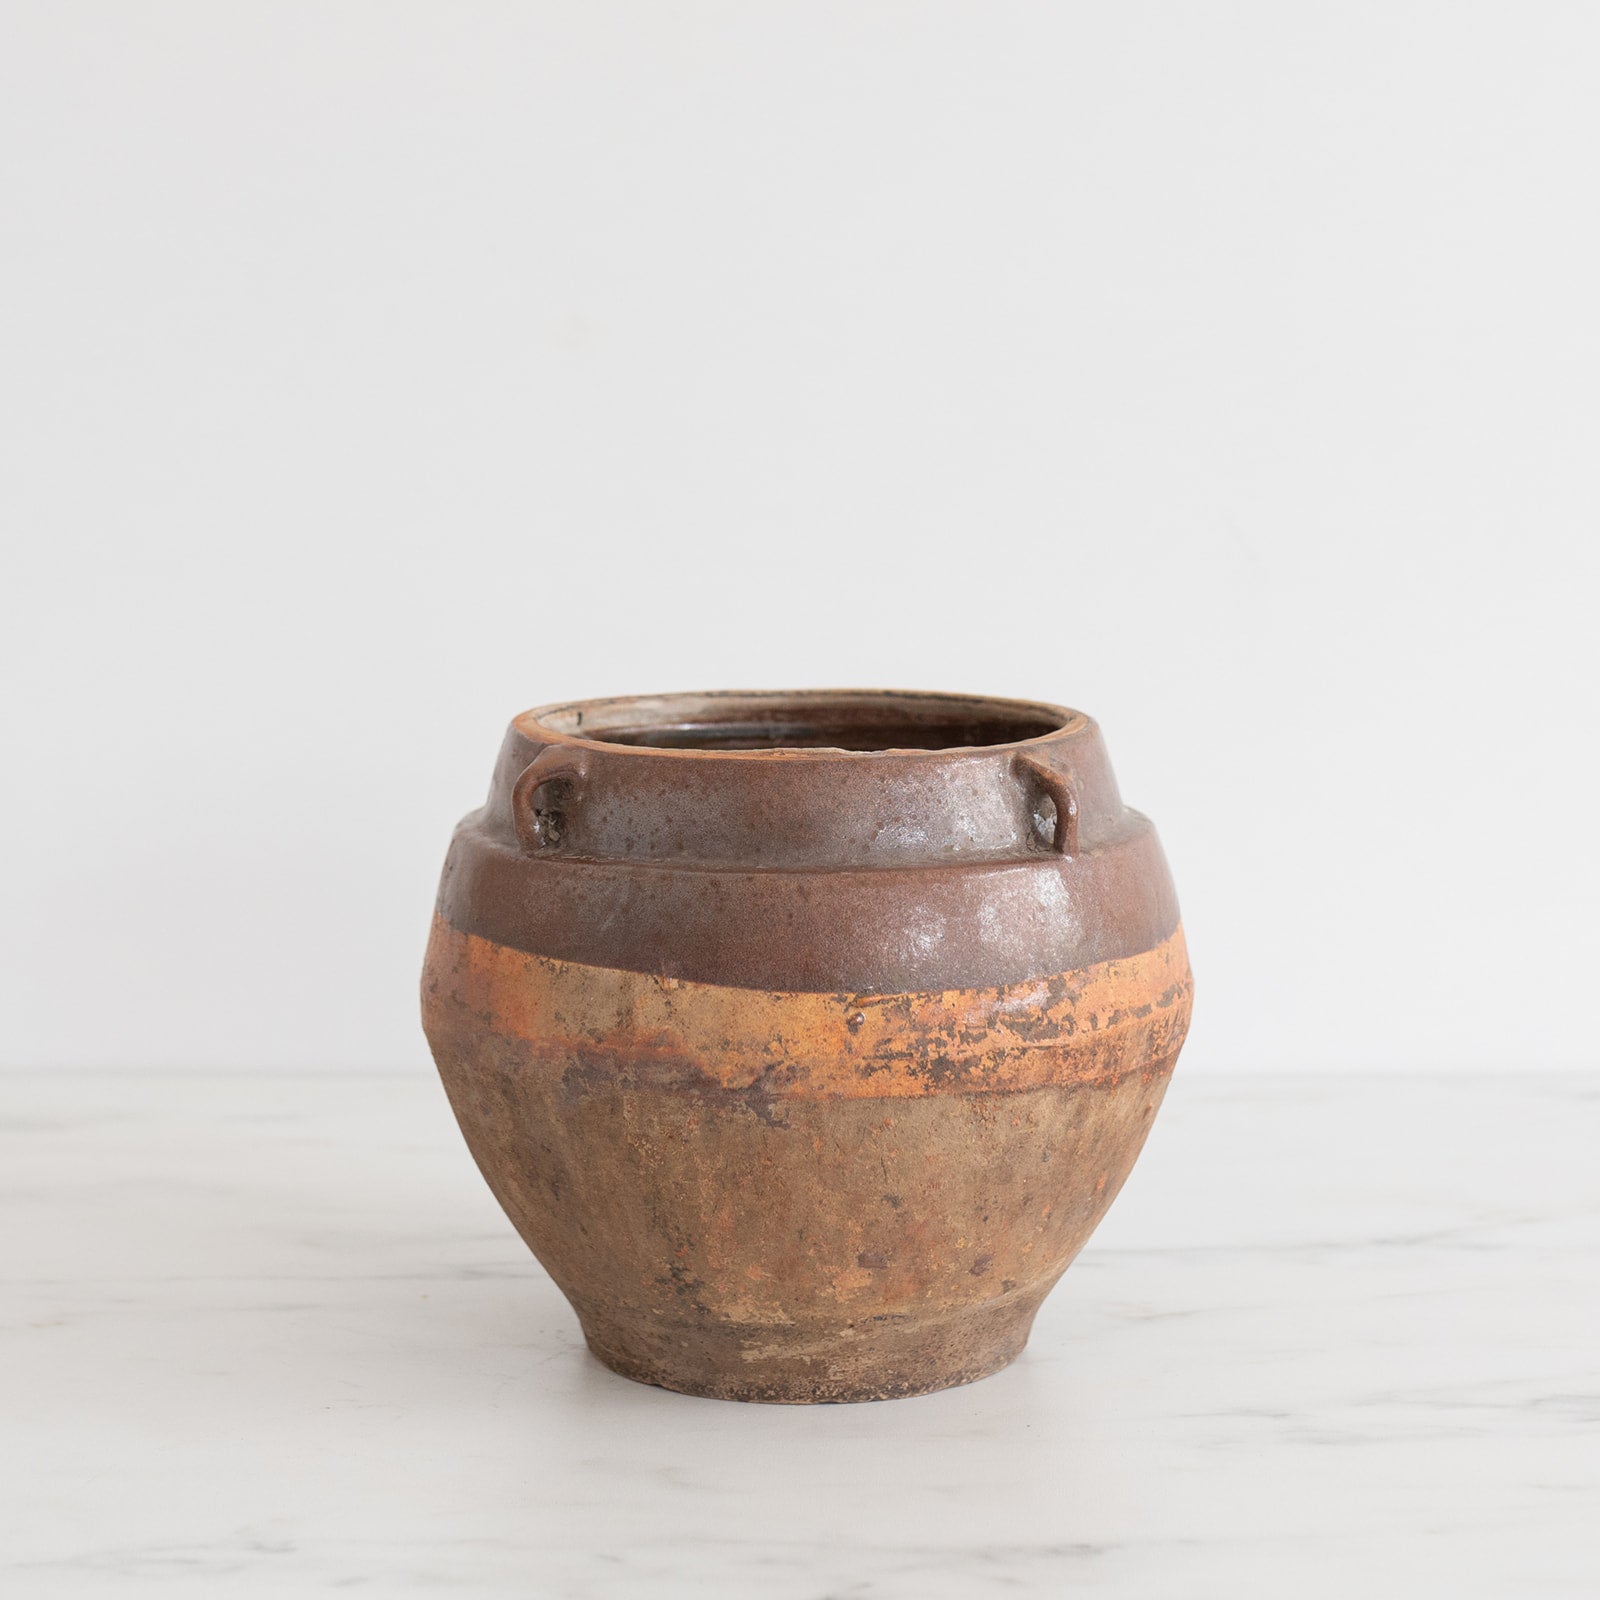 Rustic Partial Glazed Short Pots with Ears